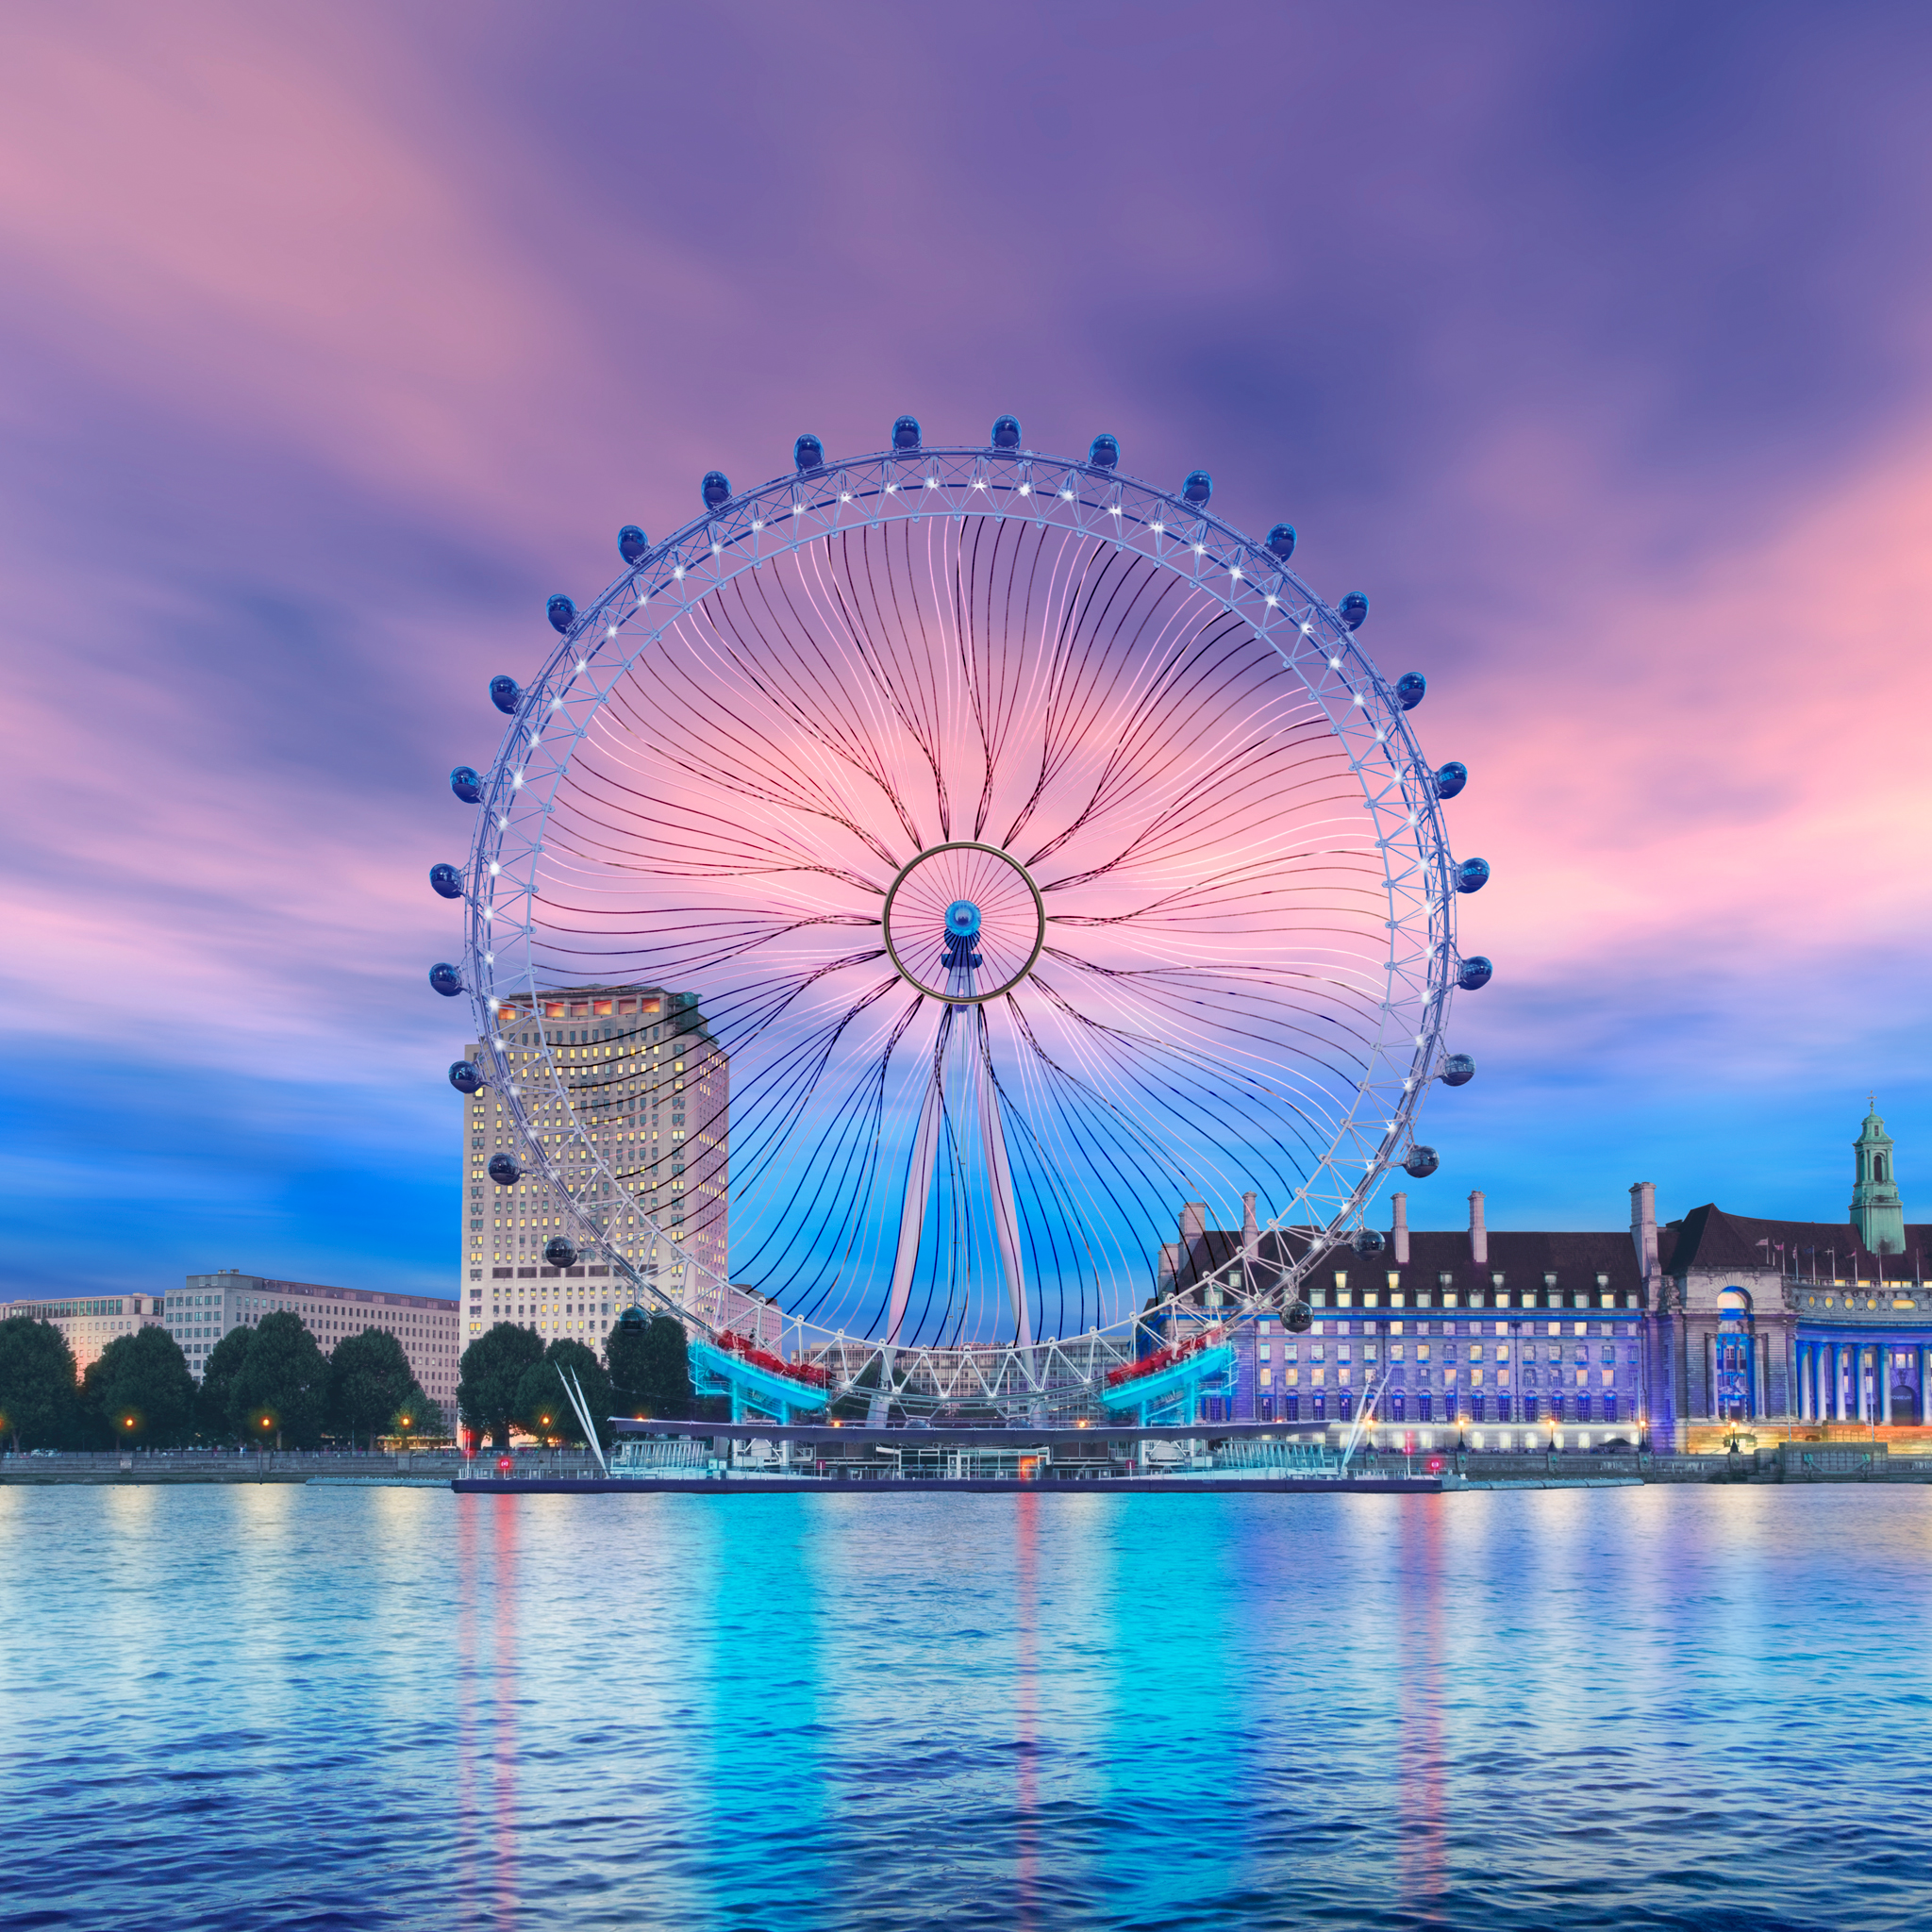 Wallpaper Weekends Stunning London Eye Wall For Iphone Ipad And Ipod Touch